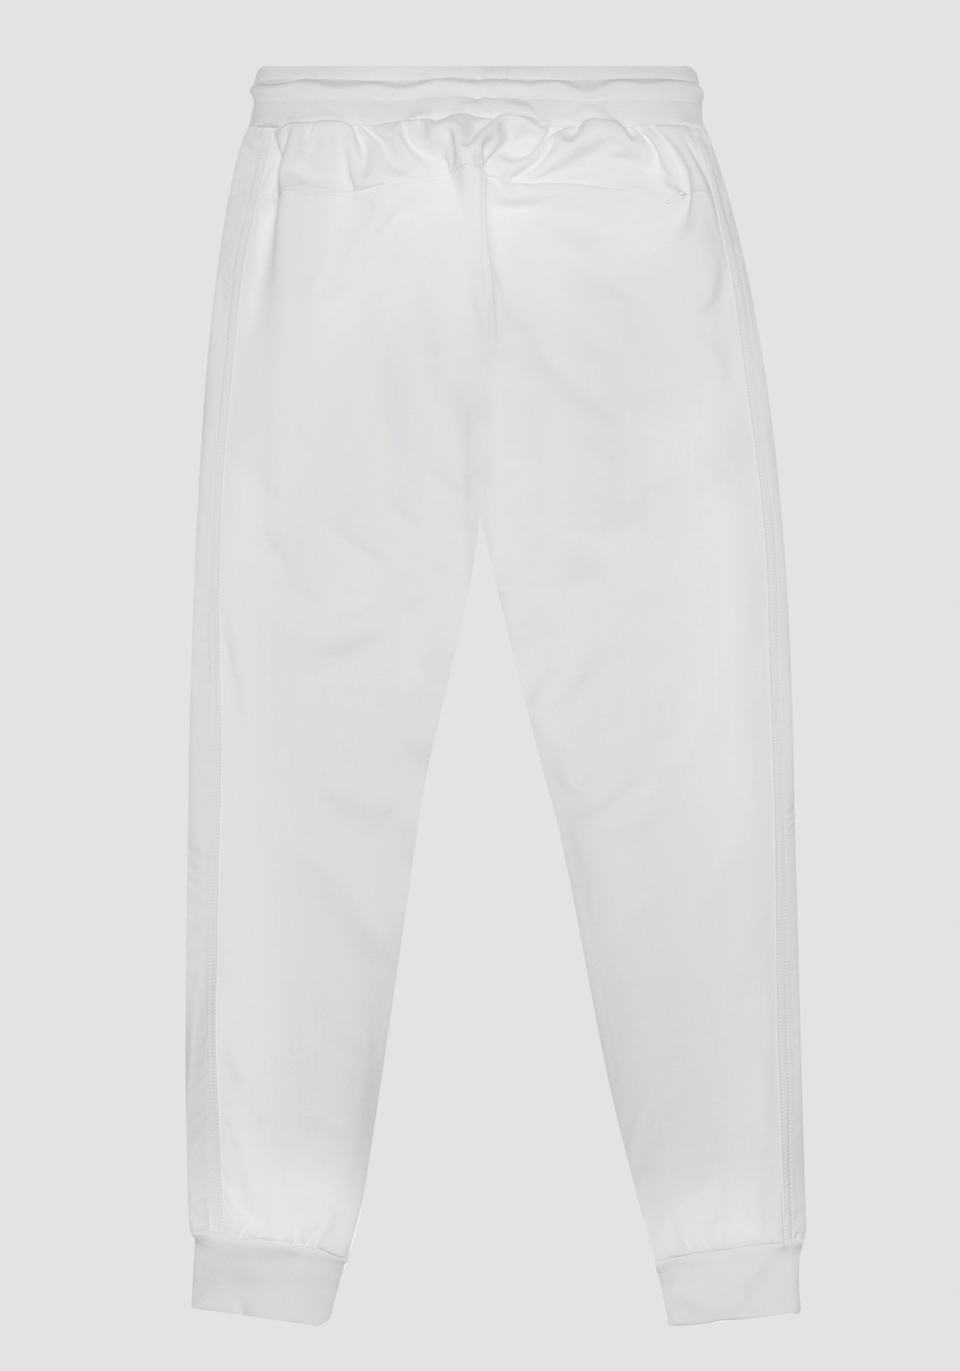 SLIM FIT SWEATPANTS IN SUSTAINABLE COTTON-POLYESTER BLEND WITH EMBROIDERED LOGO - Antony Morato Online Shop